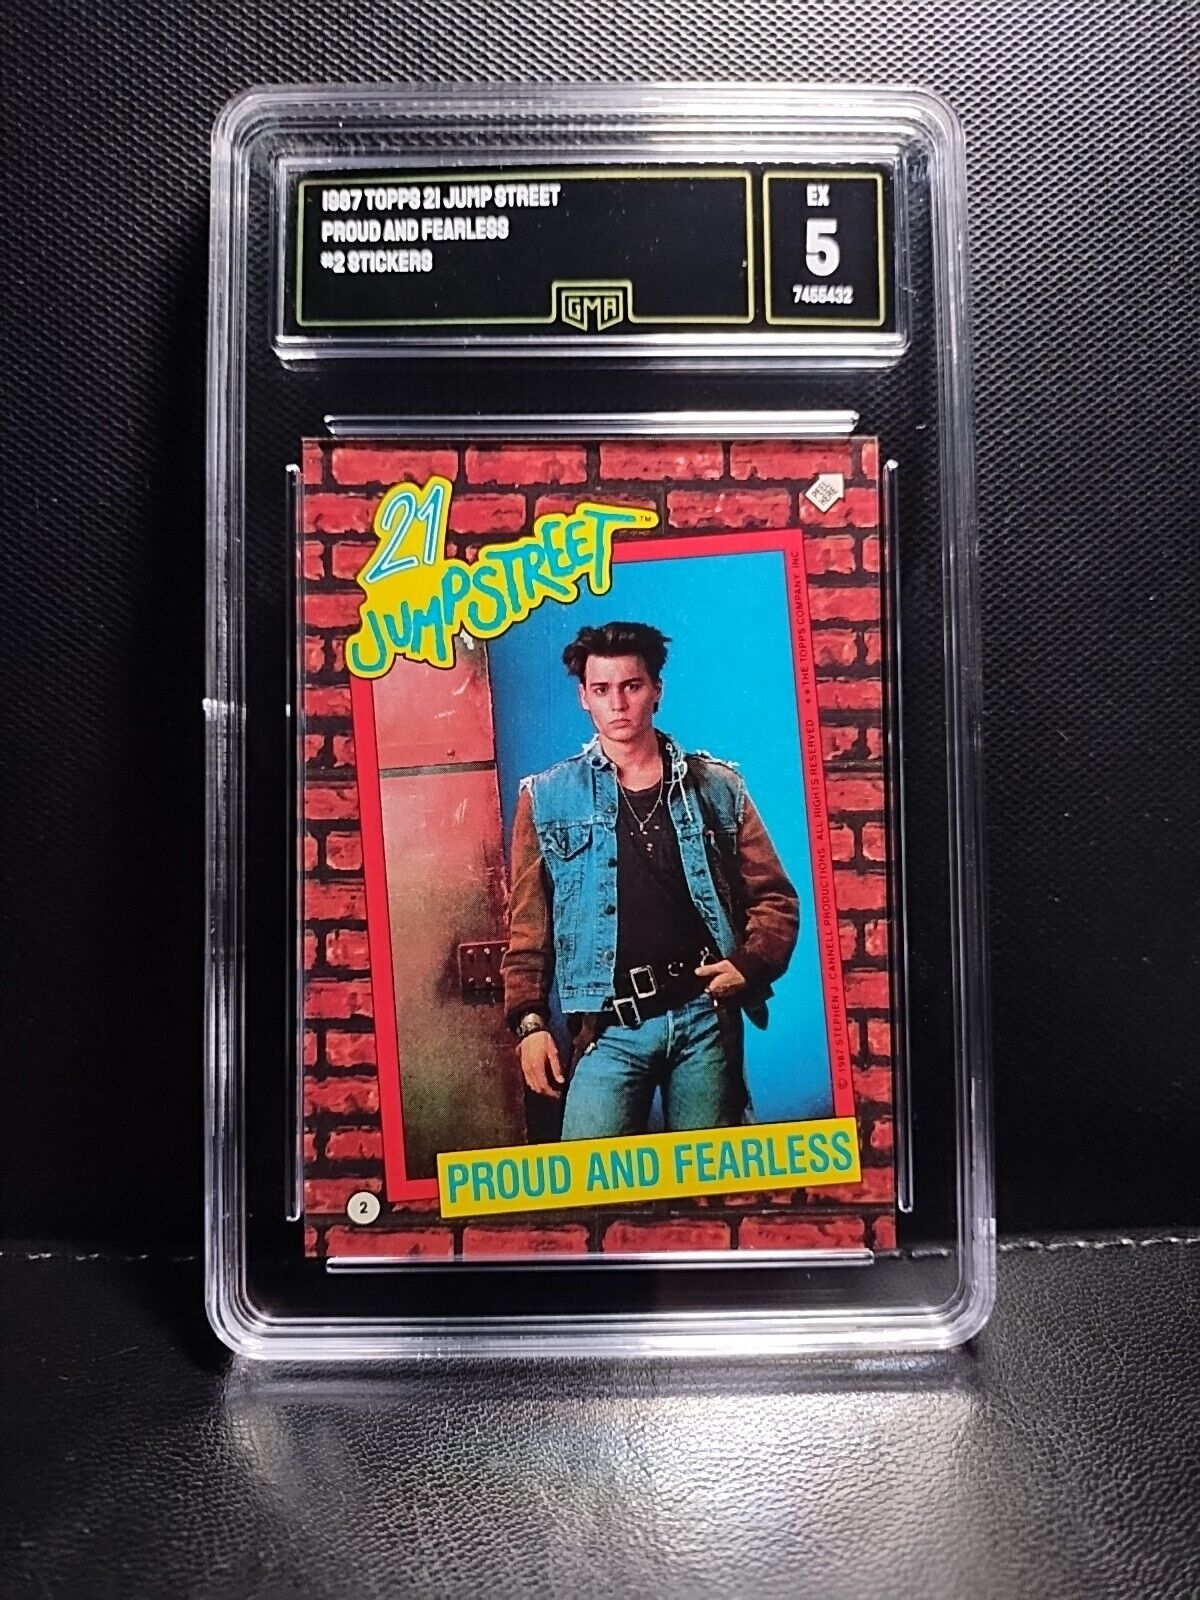 Johnny Depp Rookie, 1987 Topps Proud and Fearless #2, 21 Jump Street, GMA 5